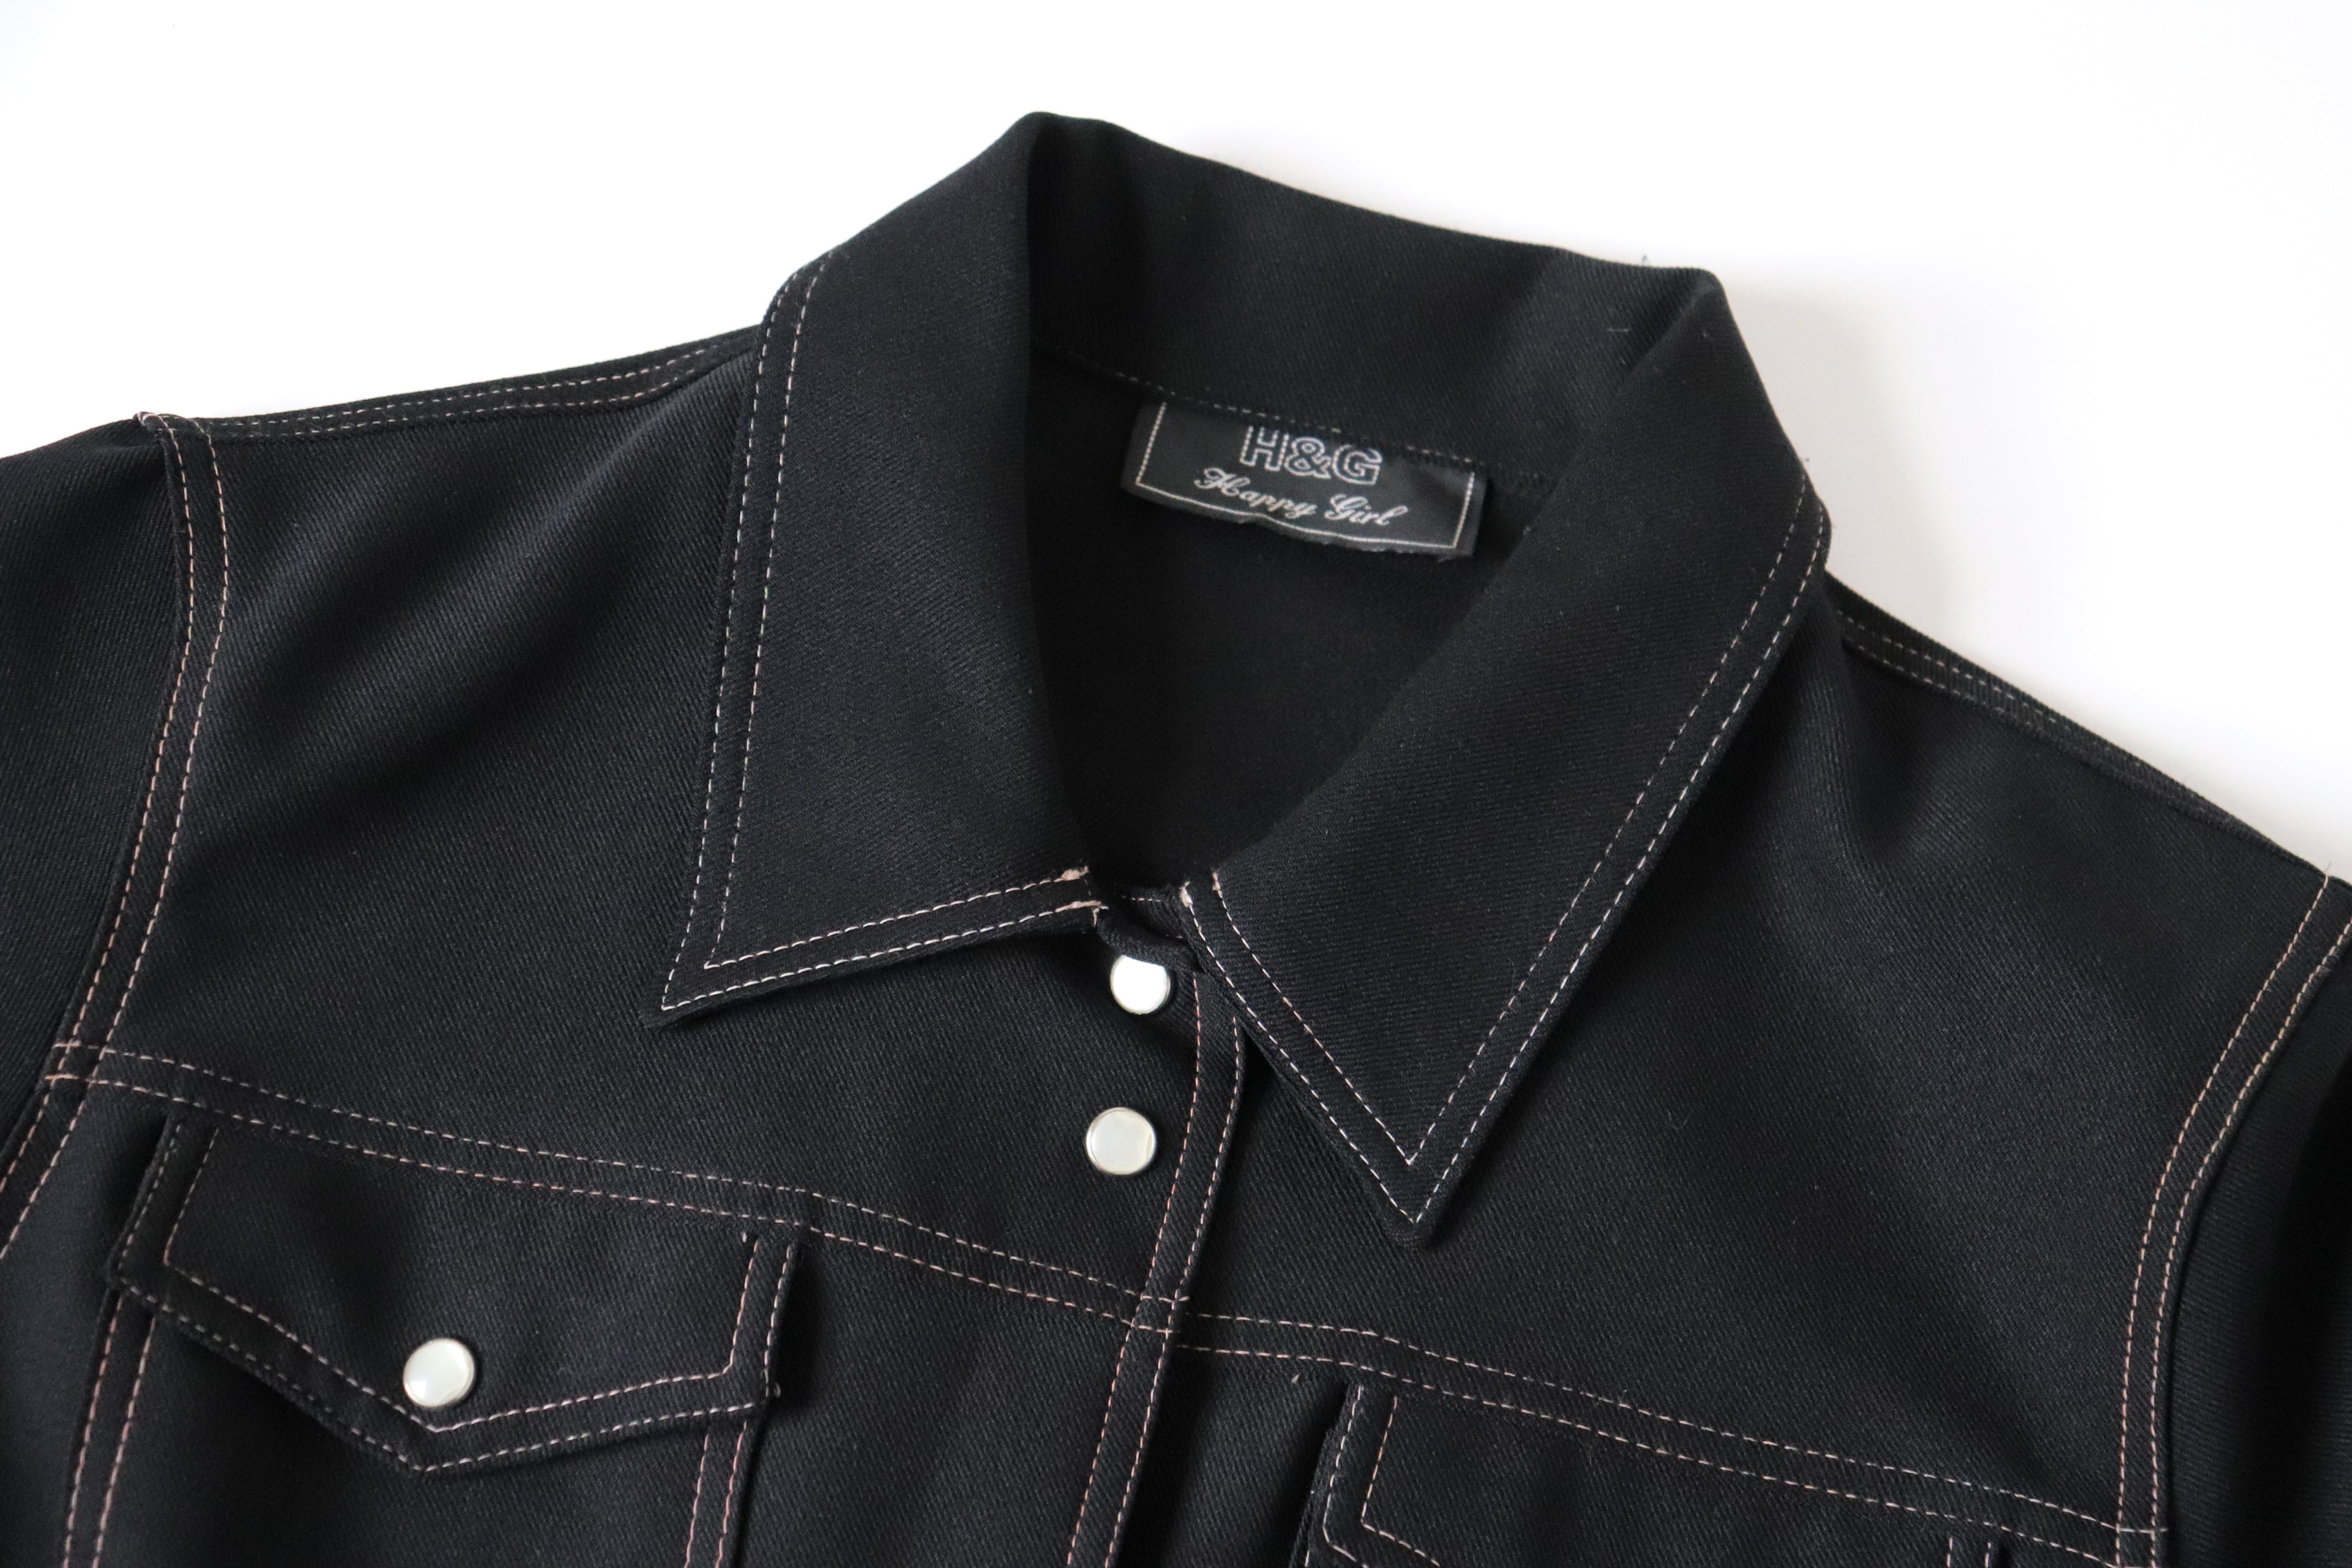 Black Western / Cowboy Fitted Shirt - Long Sleeves  - Fit UK 8 / 10